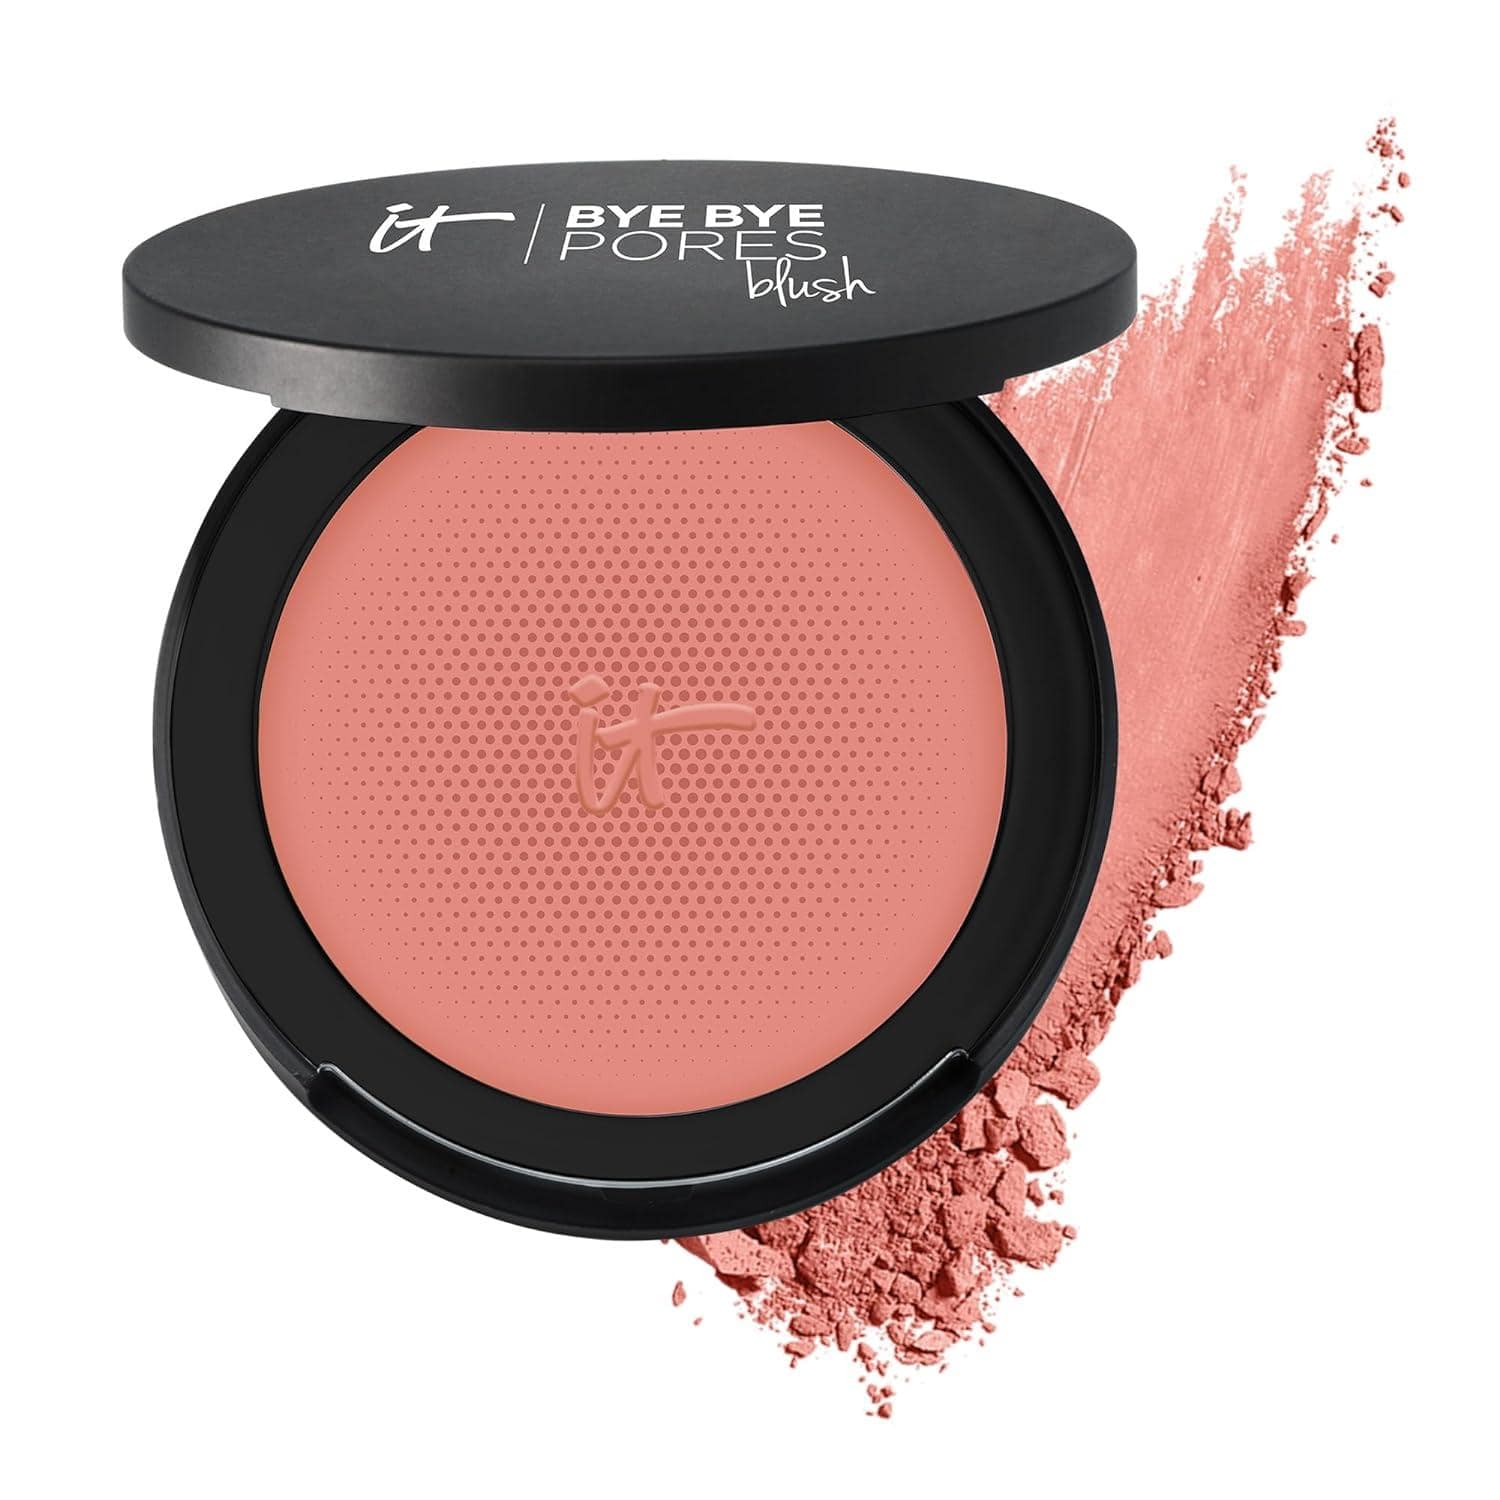 Best Blush for Oily Skin- IT Cosmetics Bye Bye Pores Blush, a blurring pressed powder blush, perfect for oily skin. Shades offer a matte finish, some providing a shimmer-free glow.